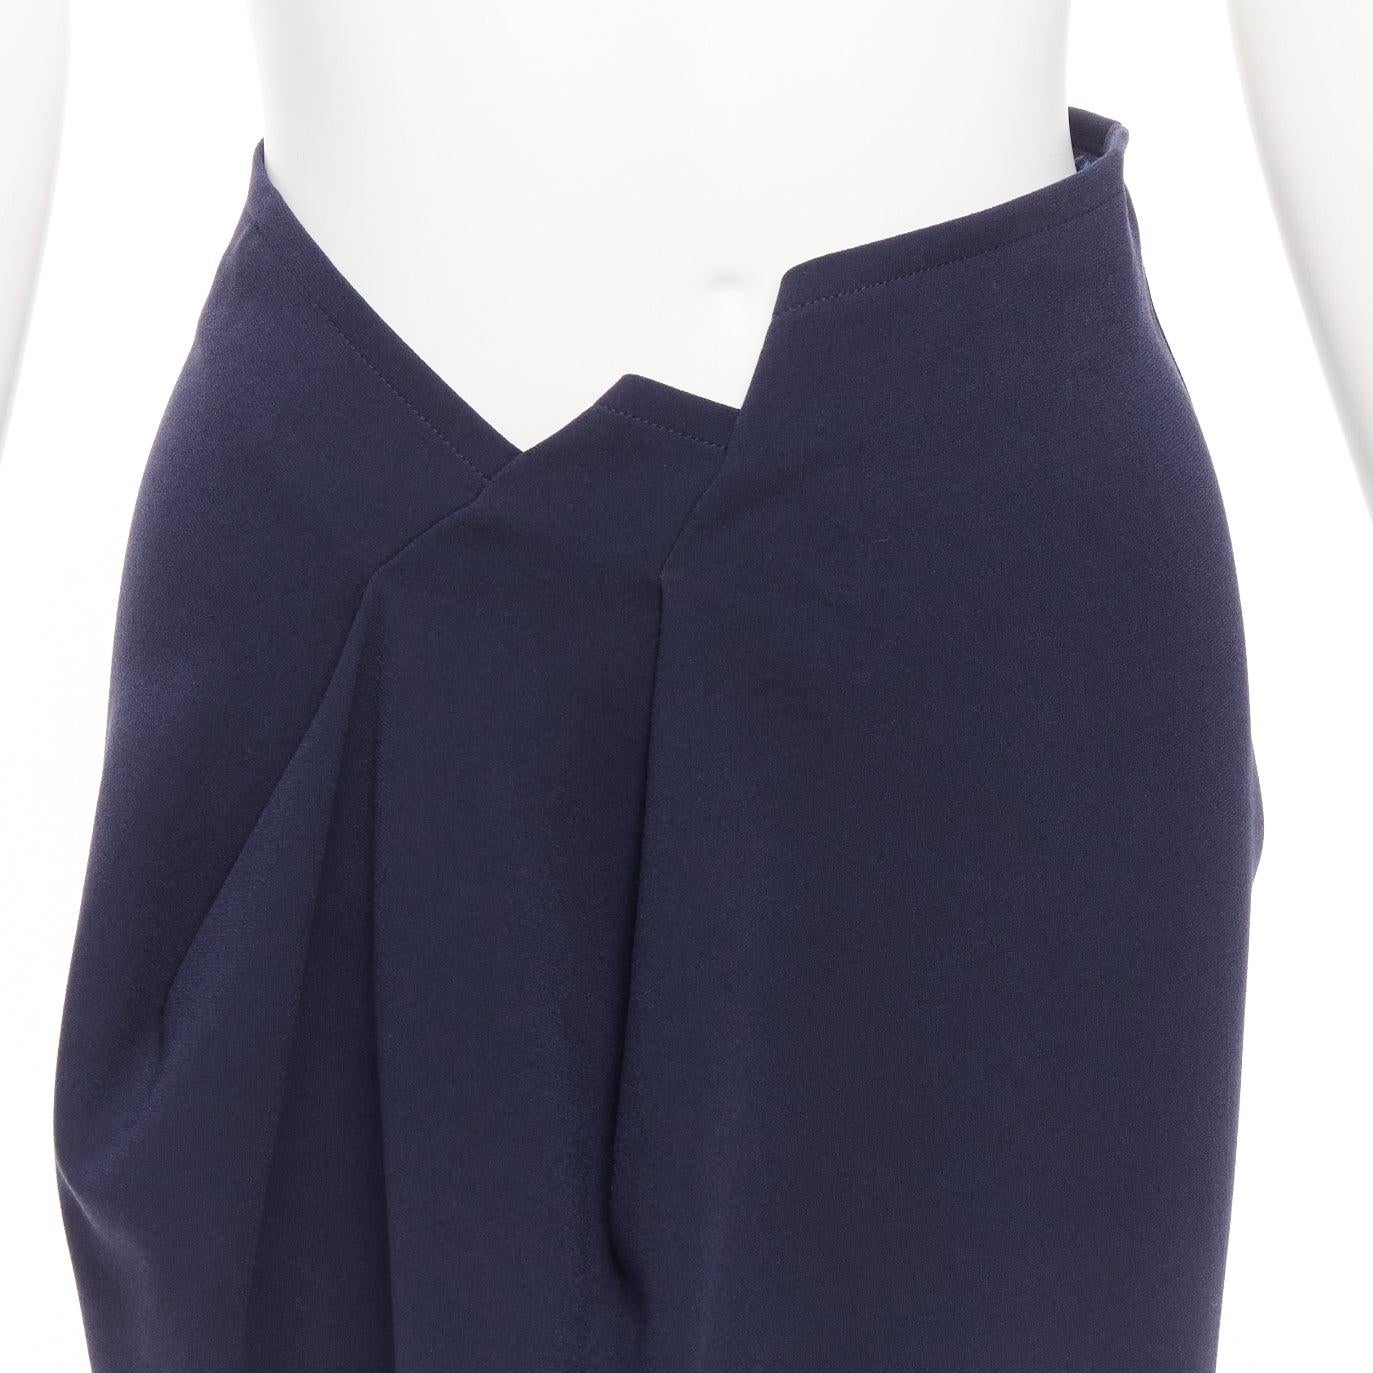 JIL SANDER navy asymmetric jagged cut out waistband skirt FR32 XXS
Reference: LNKO/A02316
Brand: Jil Sander
Material: Triacetate, Blend
Color: Navy
Pattern: Solid
Closure: Zip
Lining: Navy Fabric
Extra Details: Back zip.
Made in: